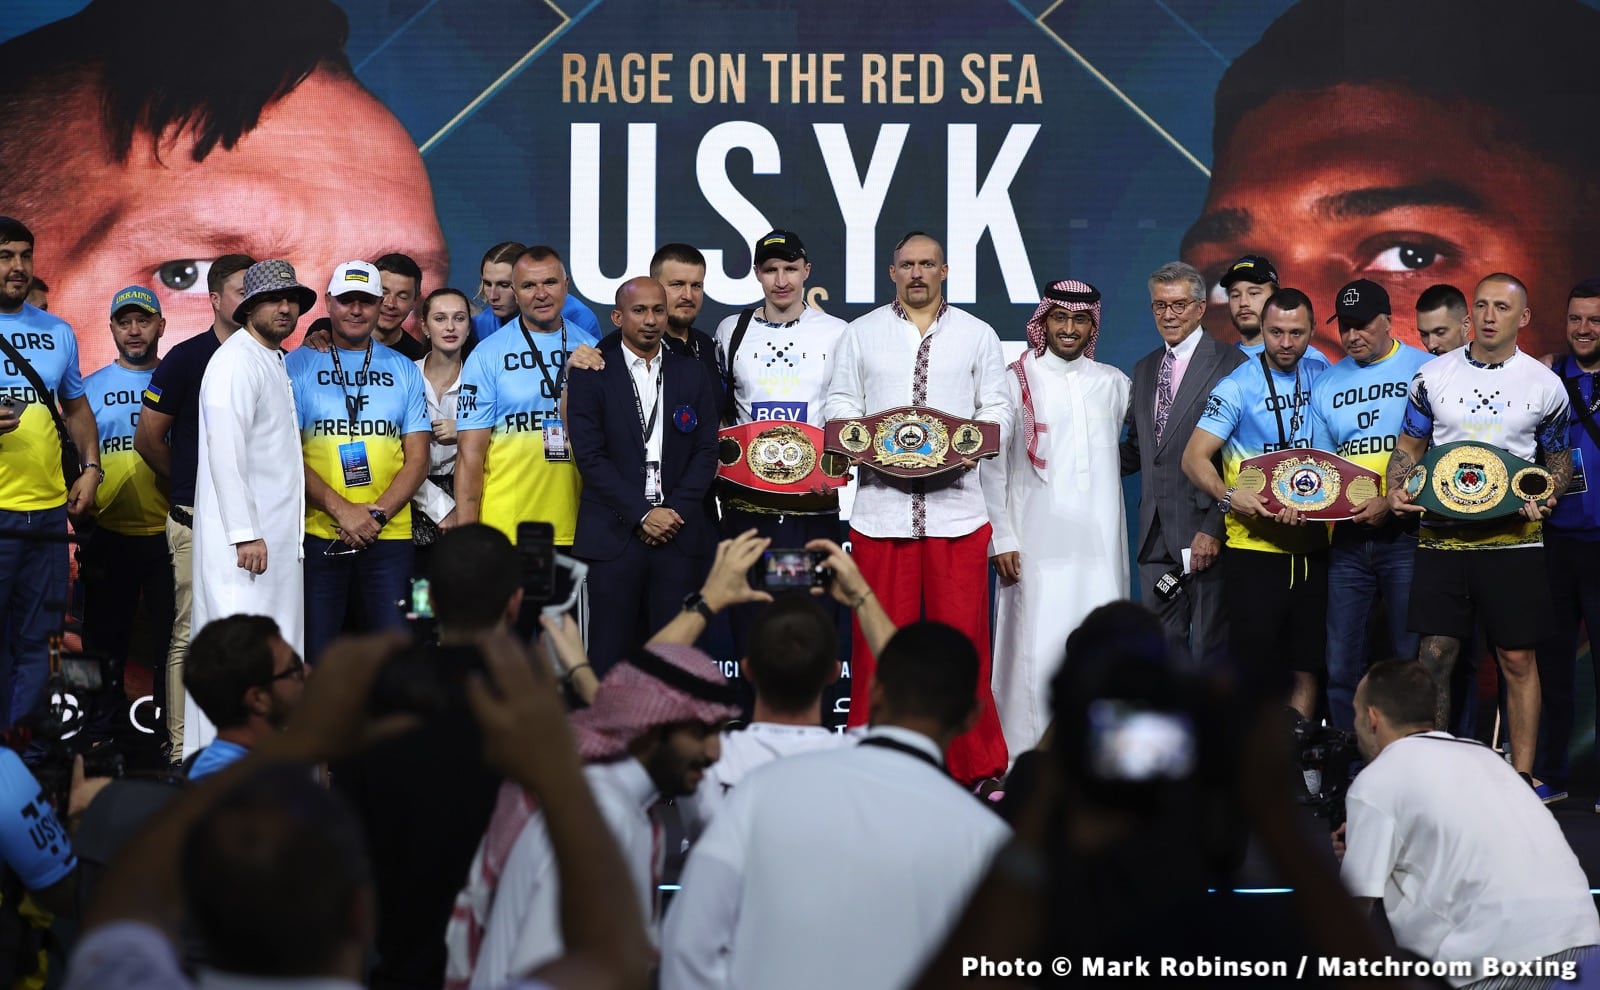 Oleksandr Usyk weighs in at 221.5 for Anthony Joshua rematch